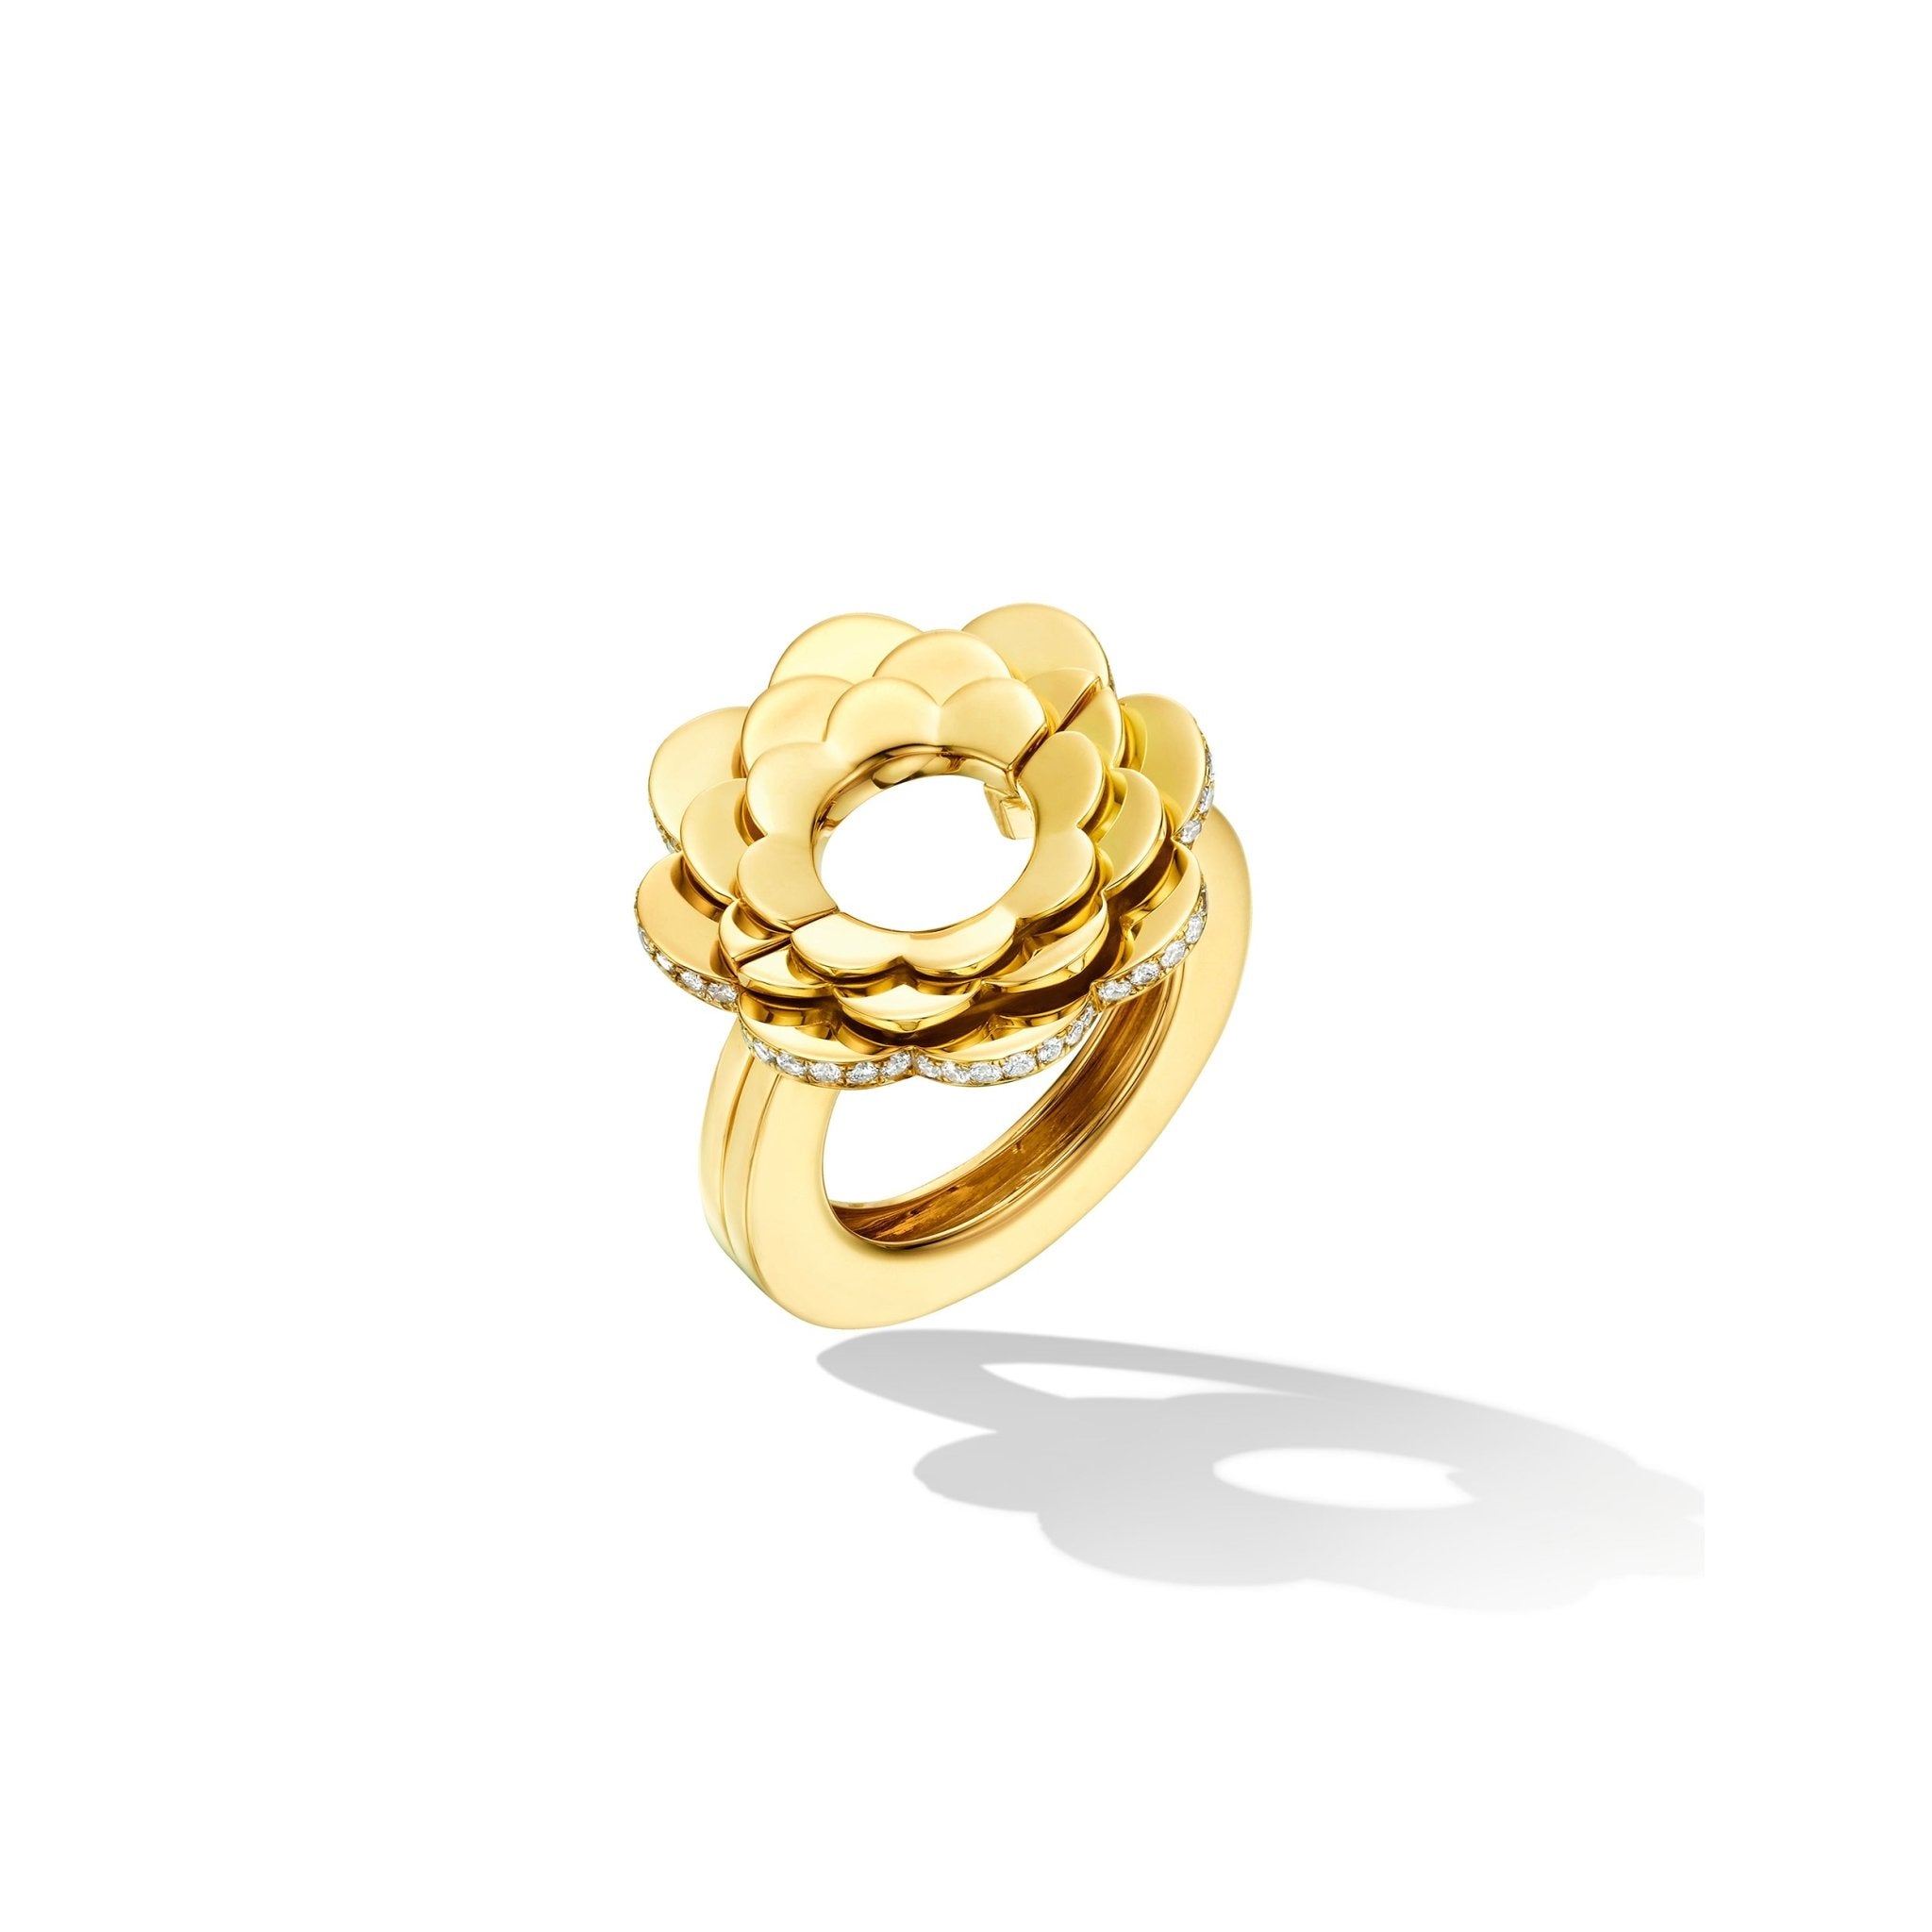 Stone Floral Design Gold Ring 02-11 - SPE Gold,Chennai